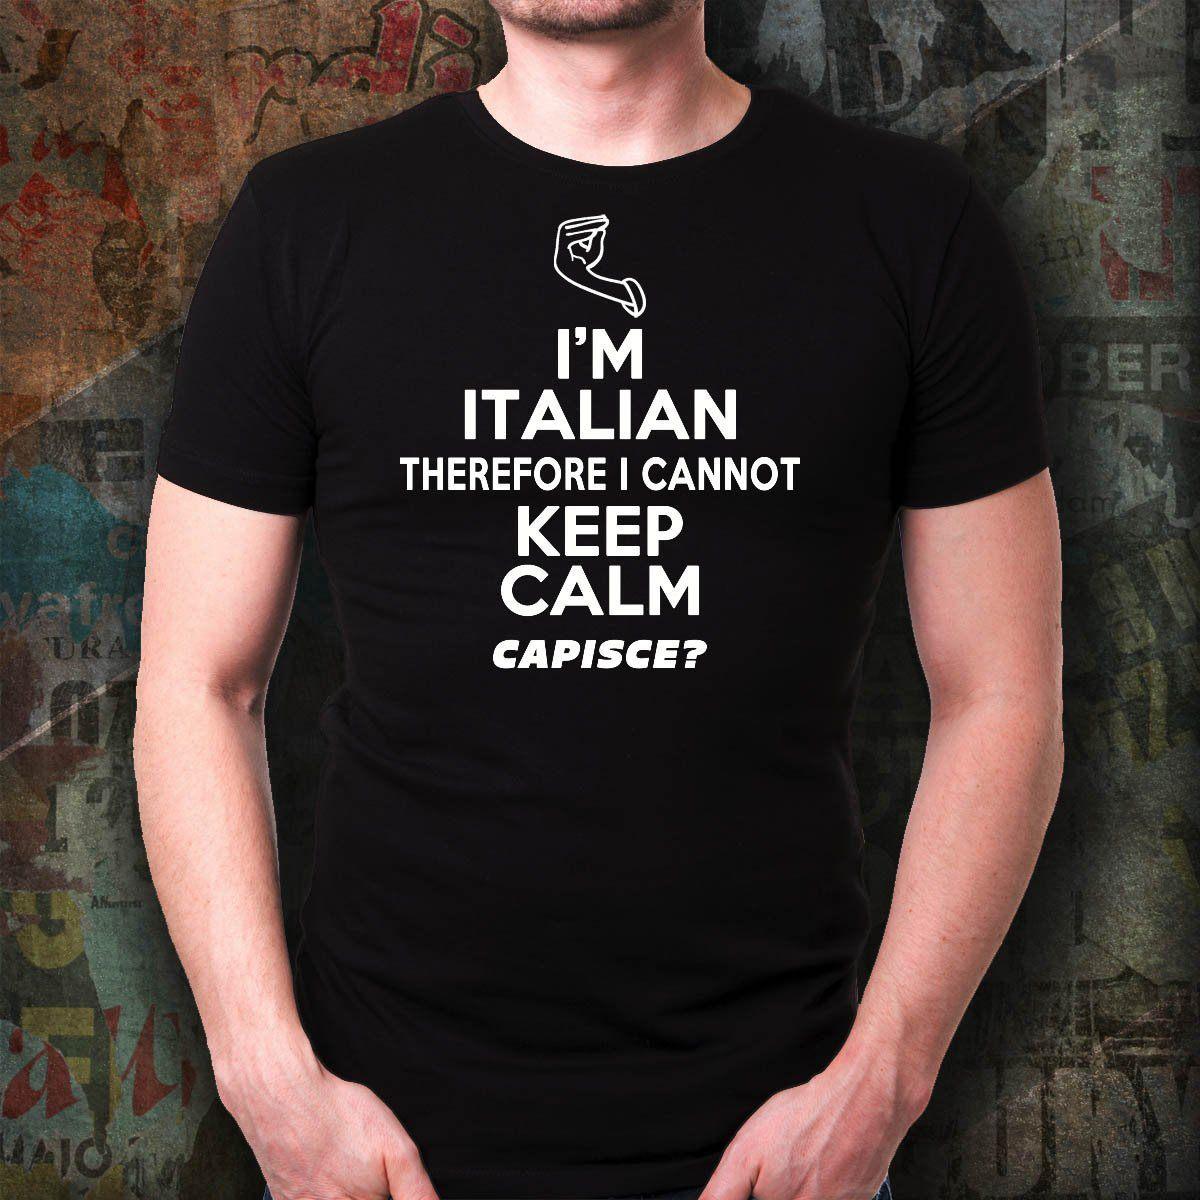 I Am Italian Therefore I Cannot Keep Calm, Capisce? - Special Sale